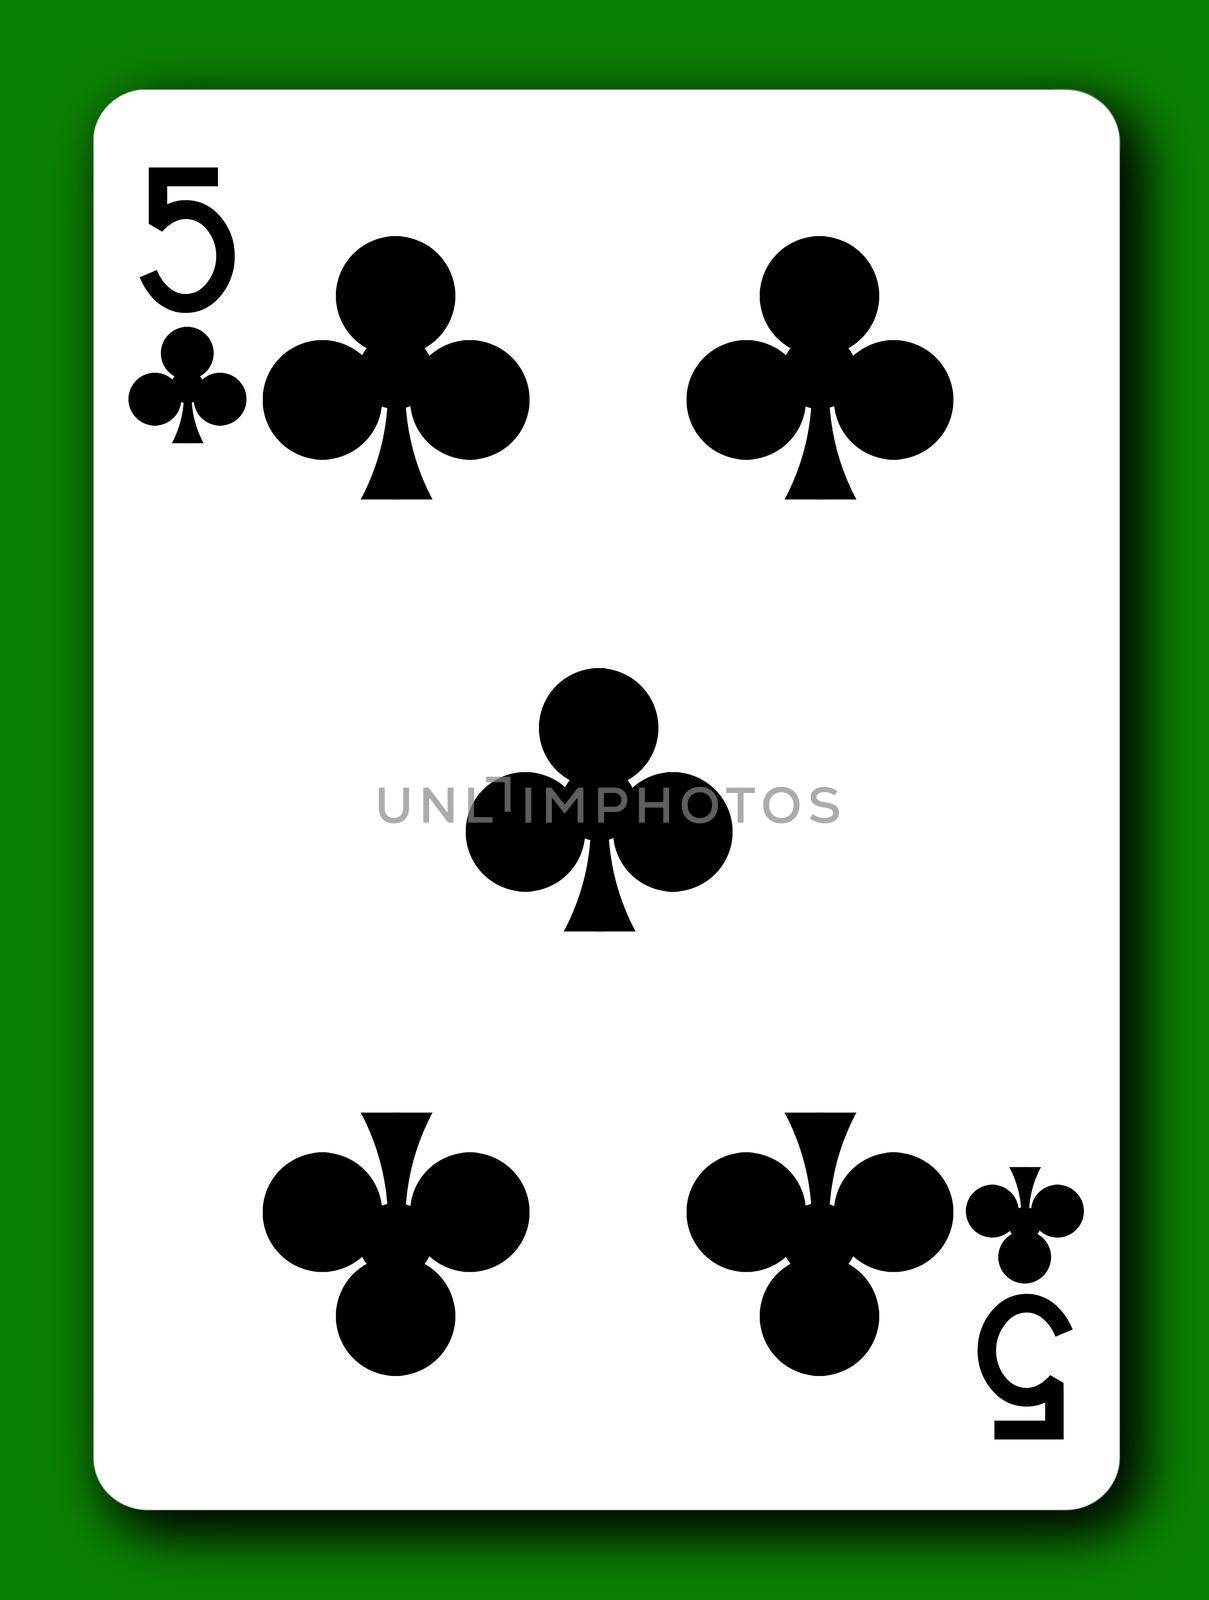 A 5 Five of Clubs playing card with clipping path to remove background and shadow 3d illustration